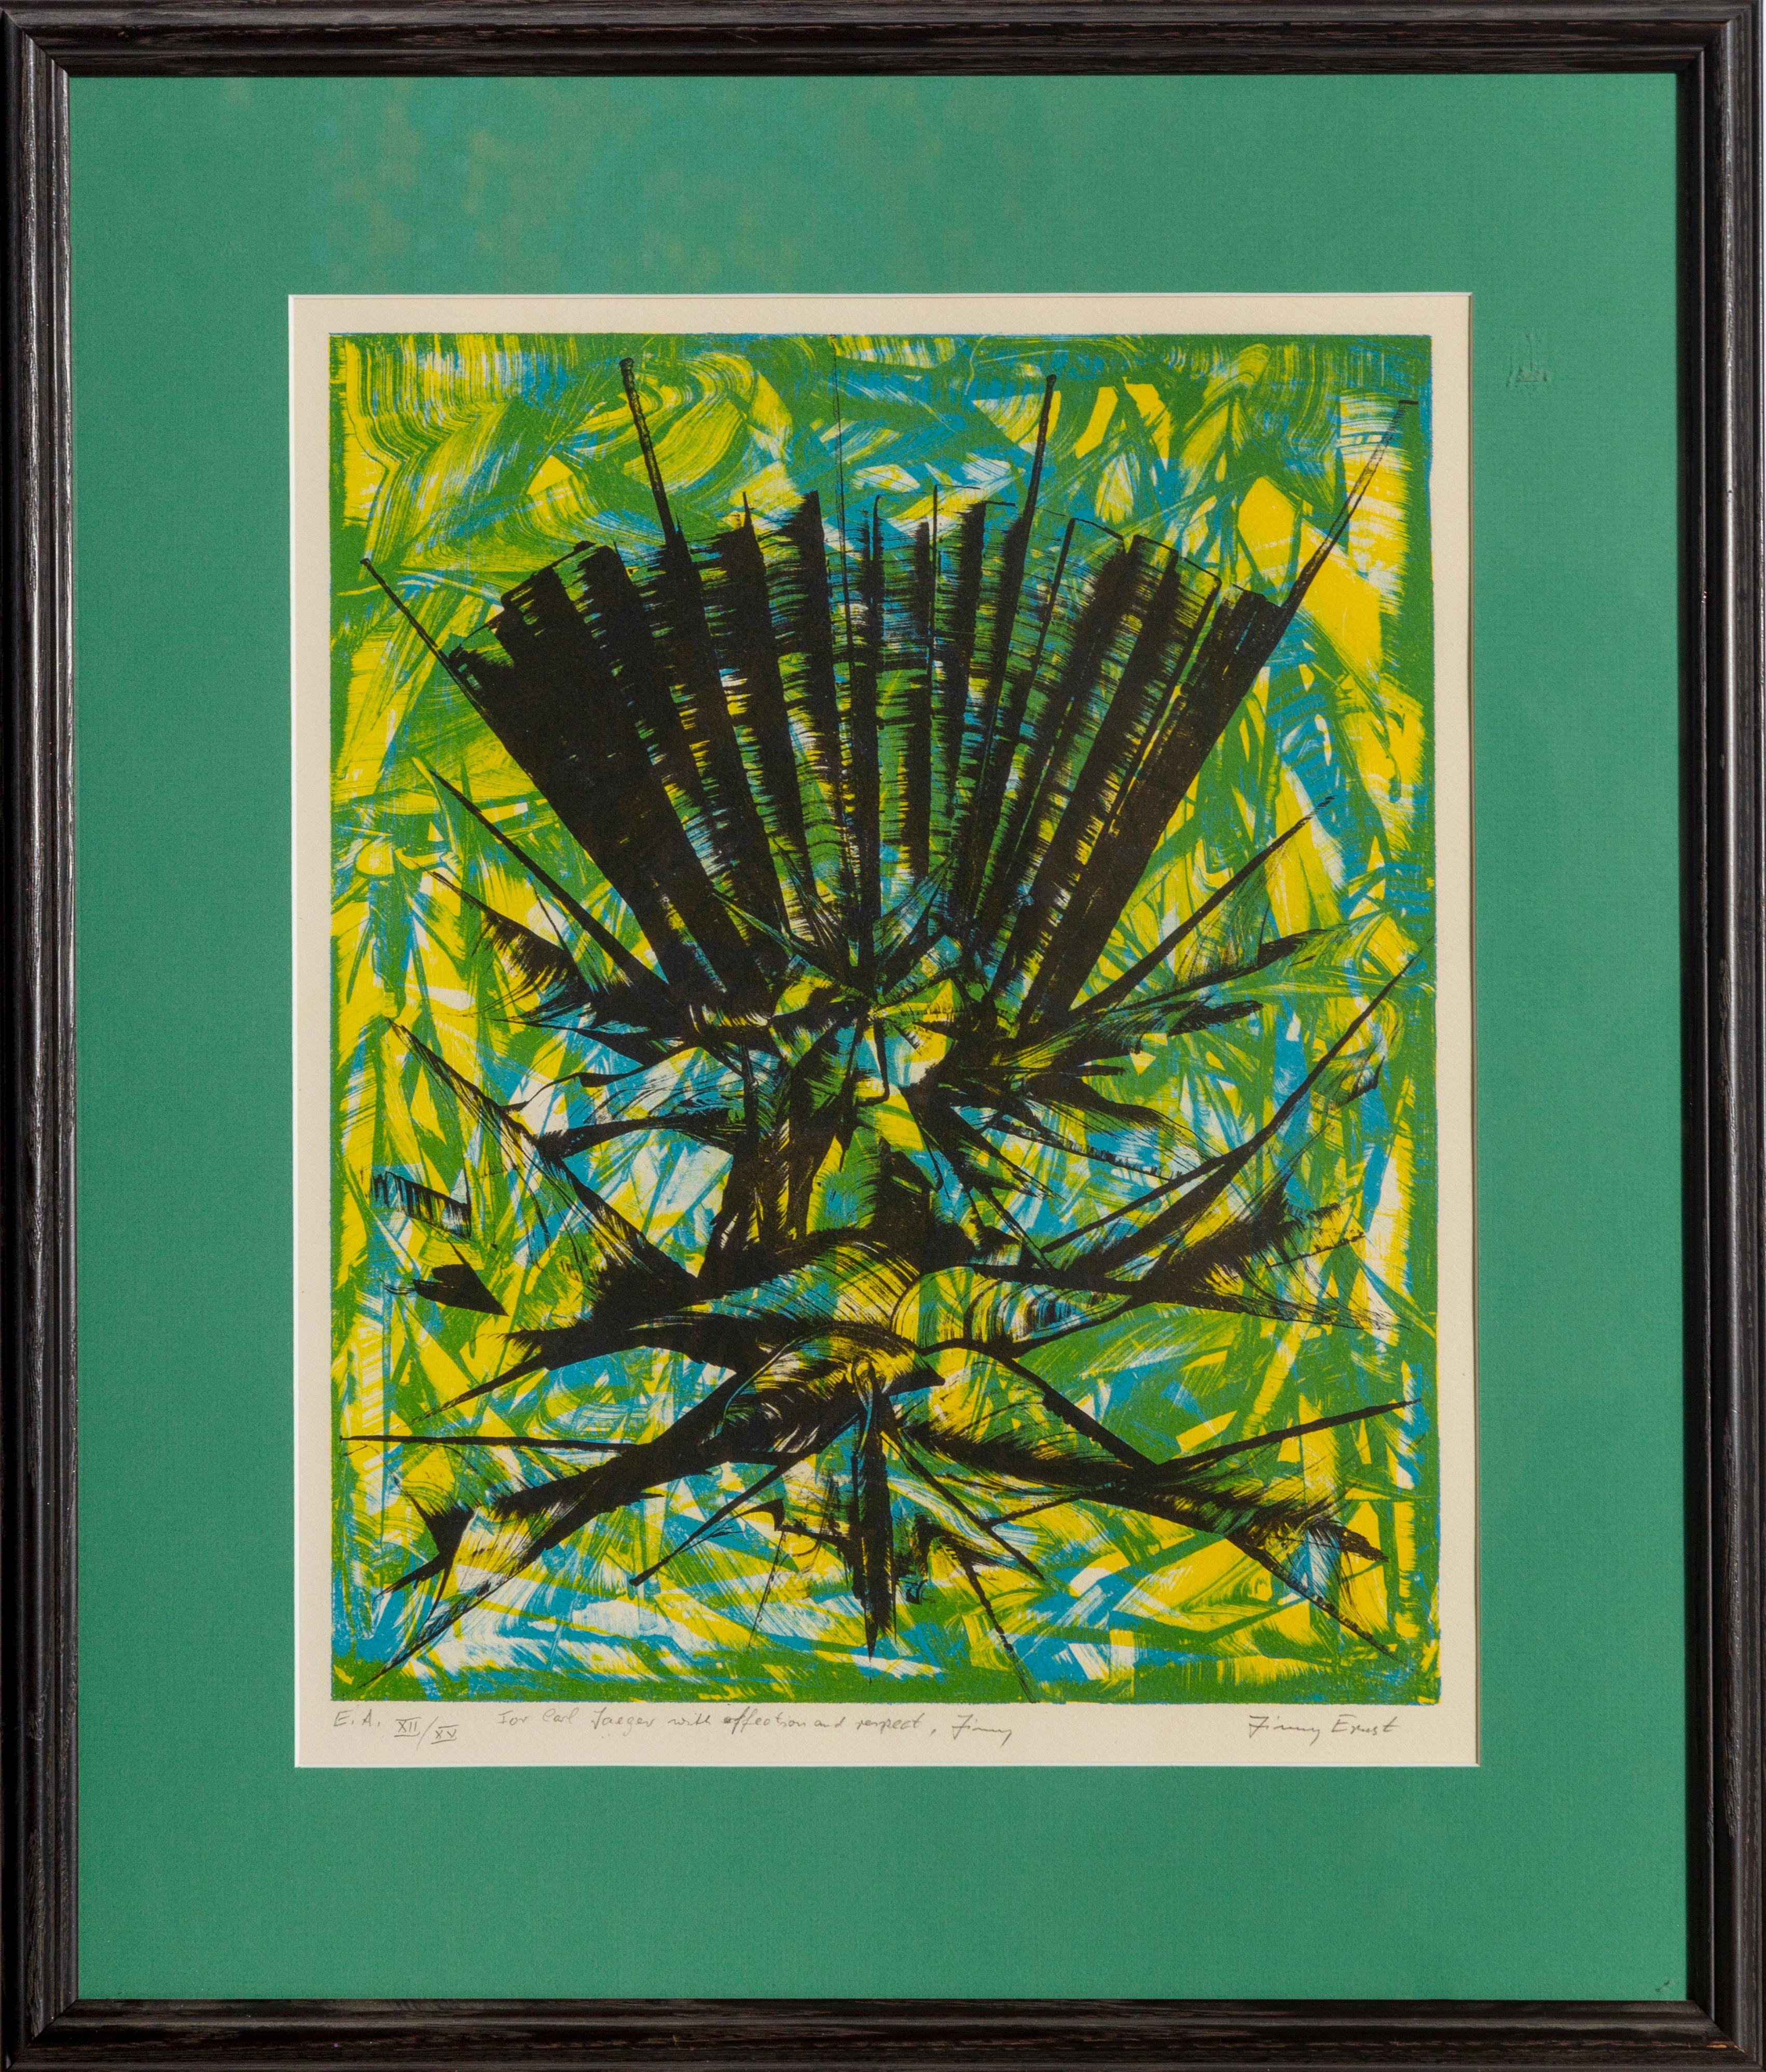 Date: circa 1970
Lithograph, signed, numbered, and dedicated in pencil
Edition of EA XII/XV
Image Size: 15 x 12 inches
Size: 22 x 17.5 in. (55.88 x 44.45 cm)
Frame Size: 23 x 19 inches